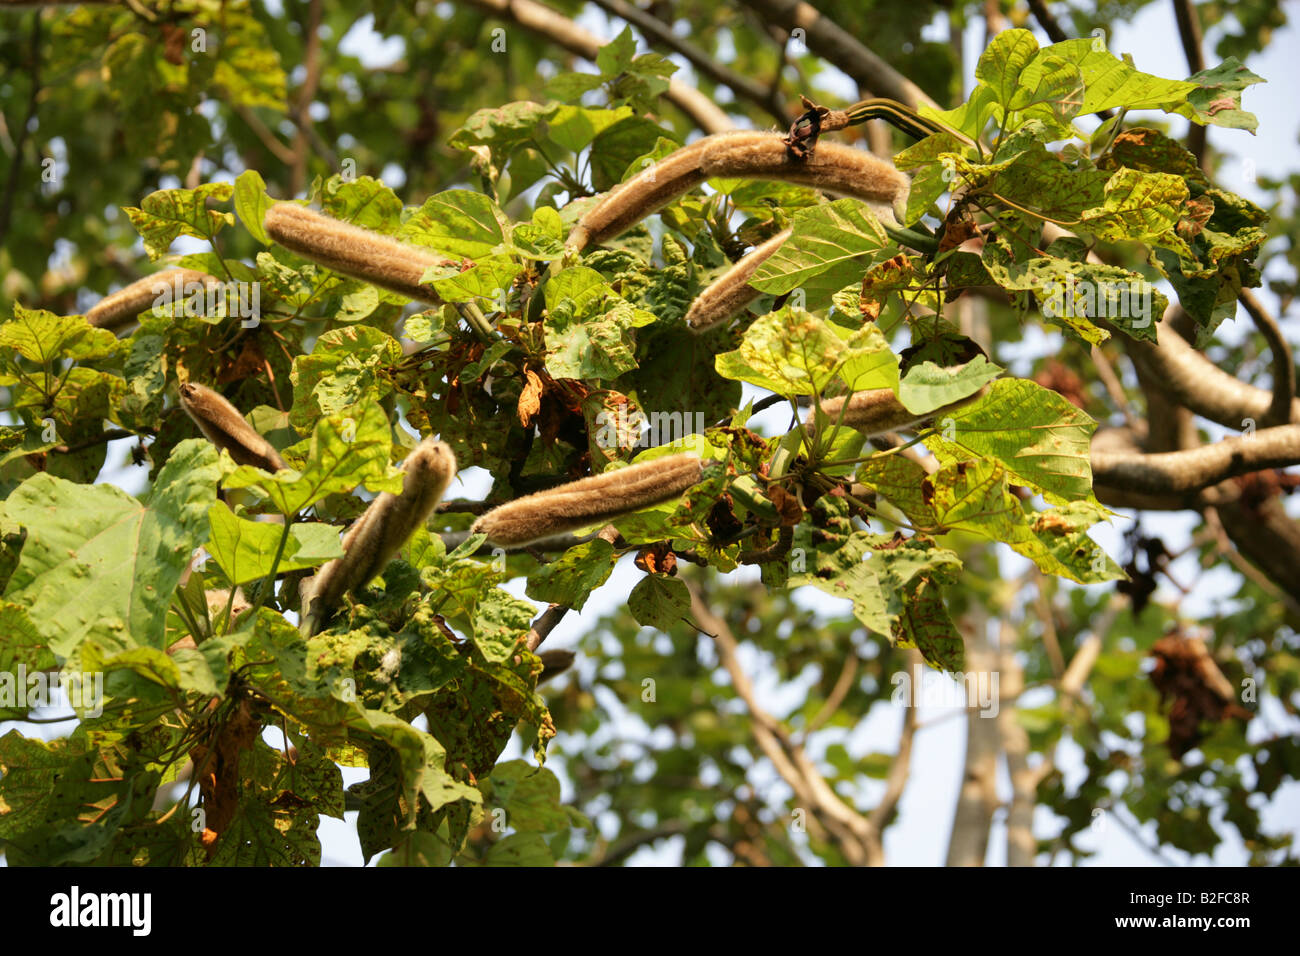 Large Tree with Long Brown Furry Seed Pods Growing at Palenque Archeological Site, Chiapas State, Mexico. Stock Photo